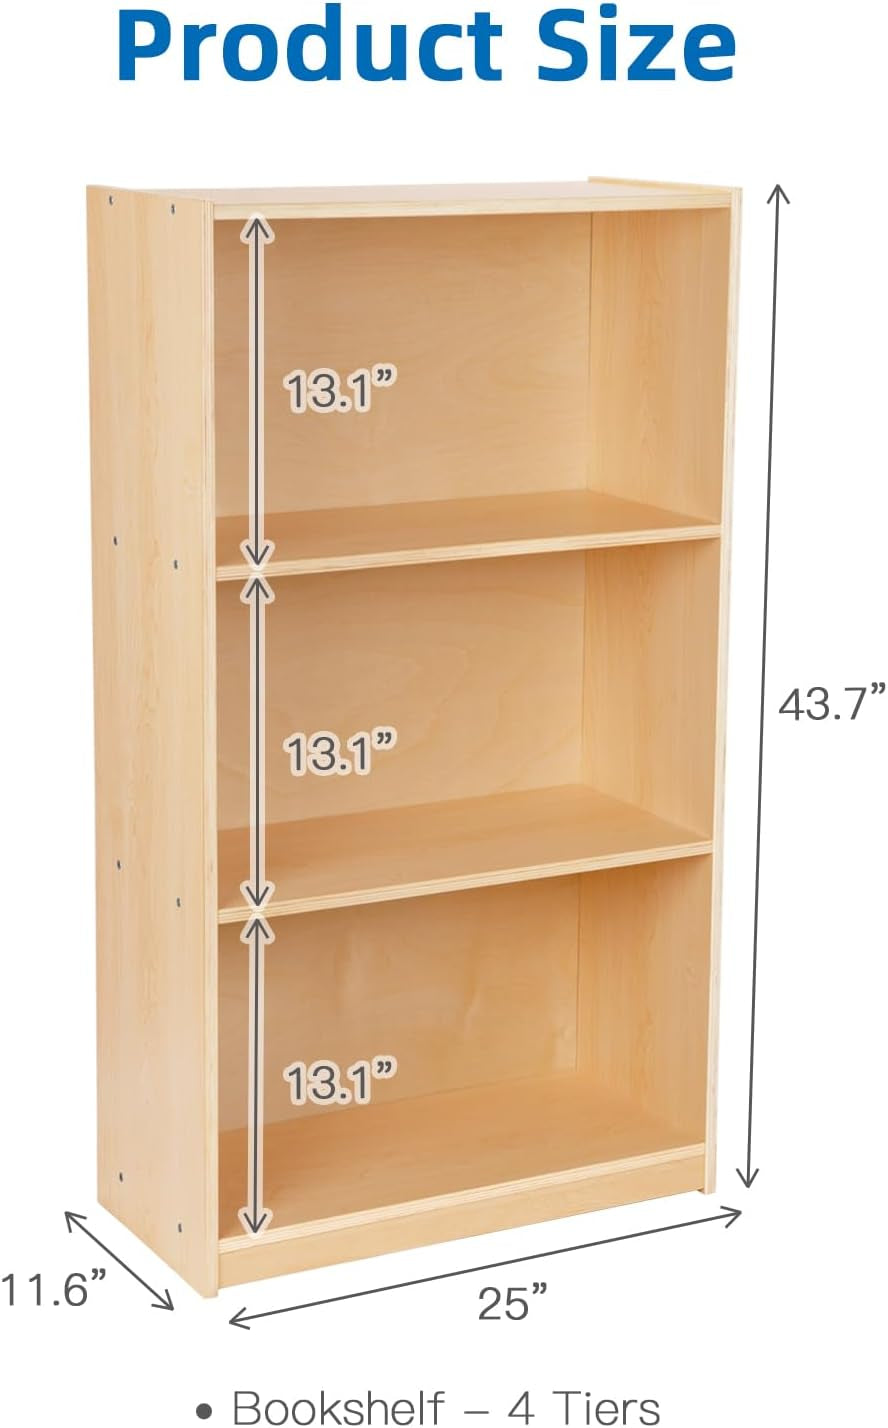 3 Tier Montessori Toy Shelf and Bookcase, Display Cabinet, Toy Organizers and Storage with anti Tipping Settings, Wooden Book Shelf for Kids Rooms, Classroom, Playroom, Nursery, School